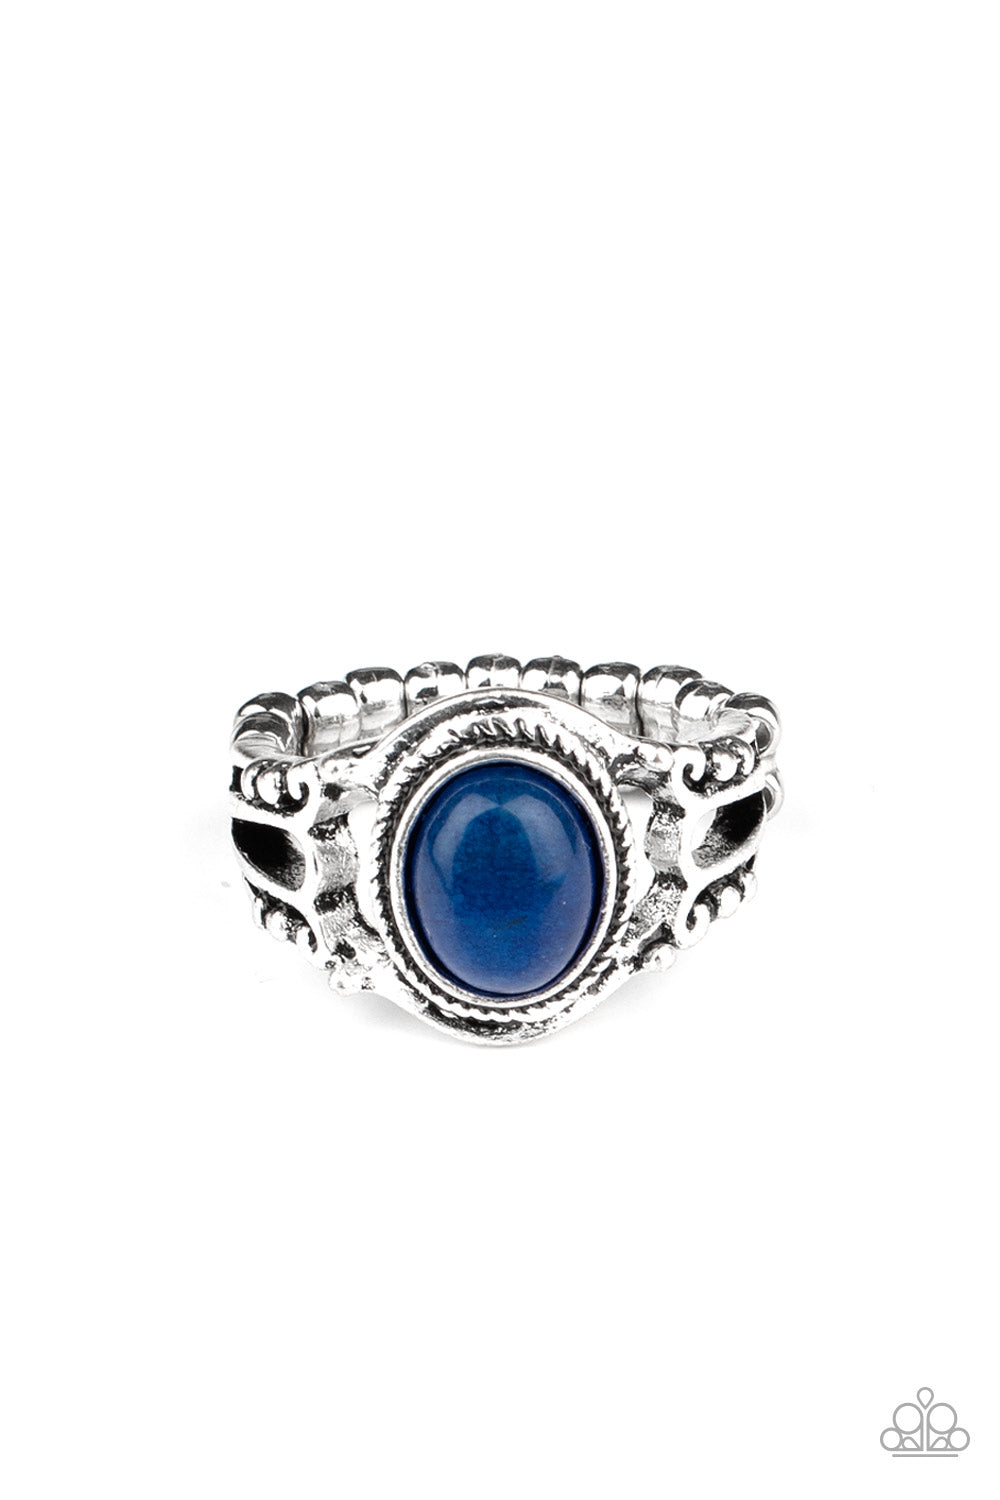 Peacefully Peaceful Blue Ring